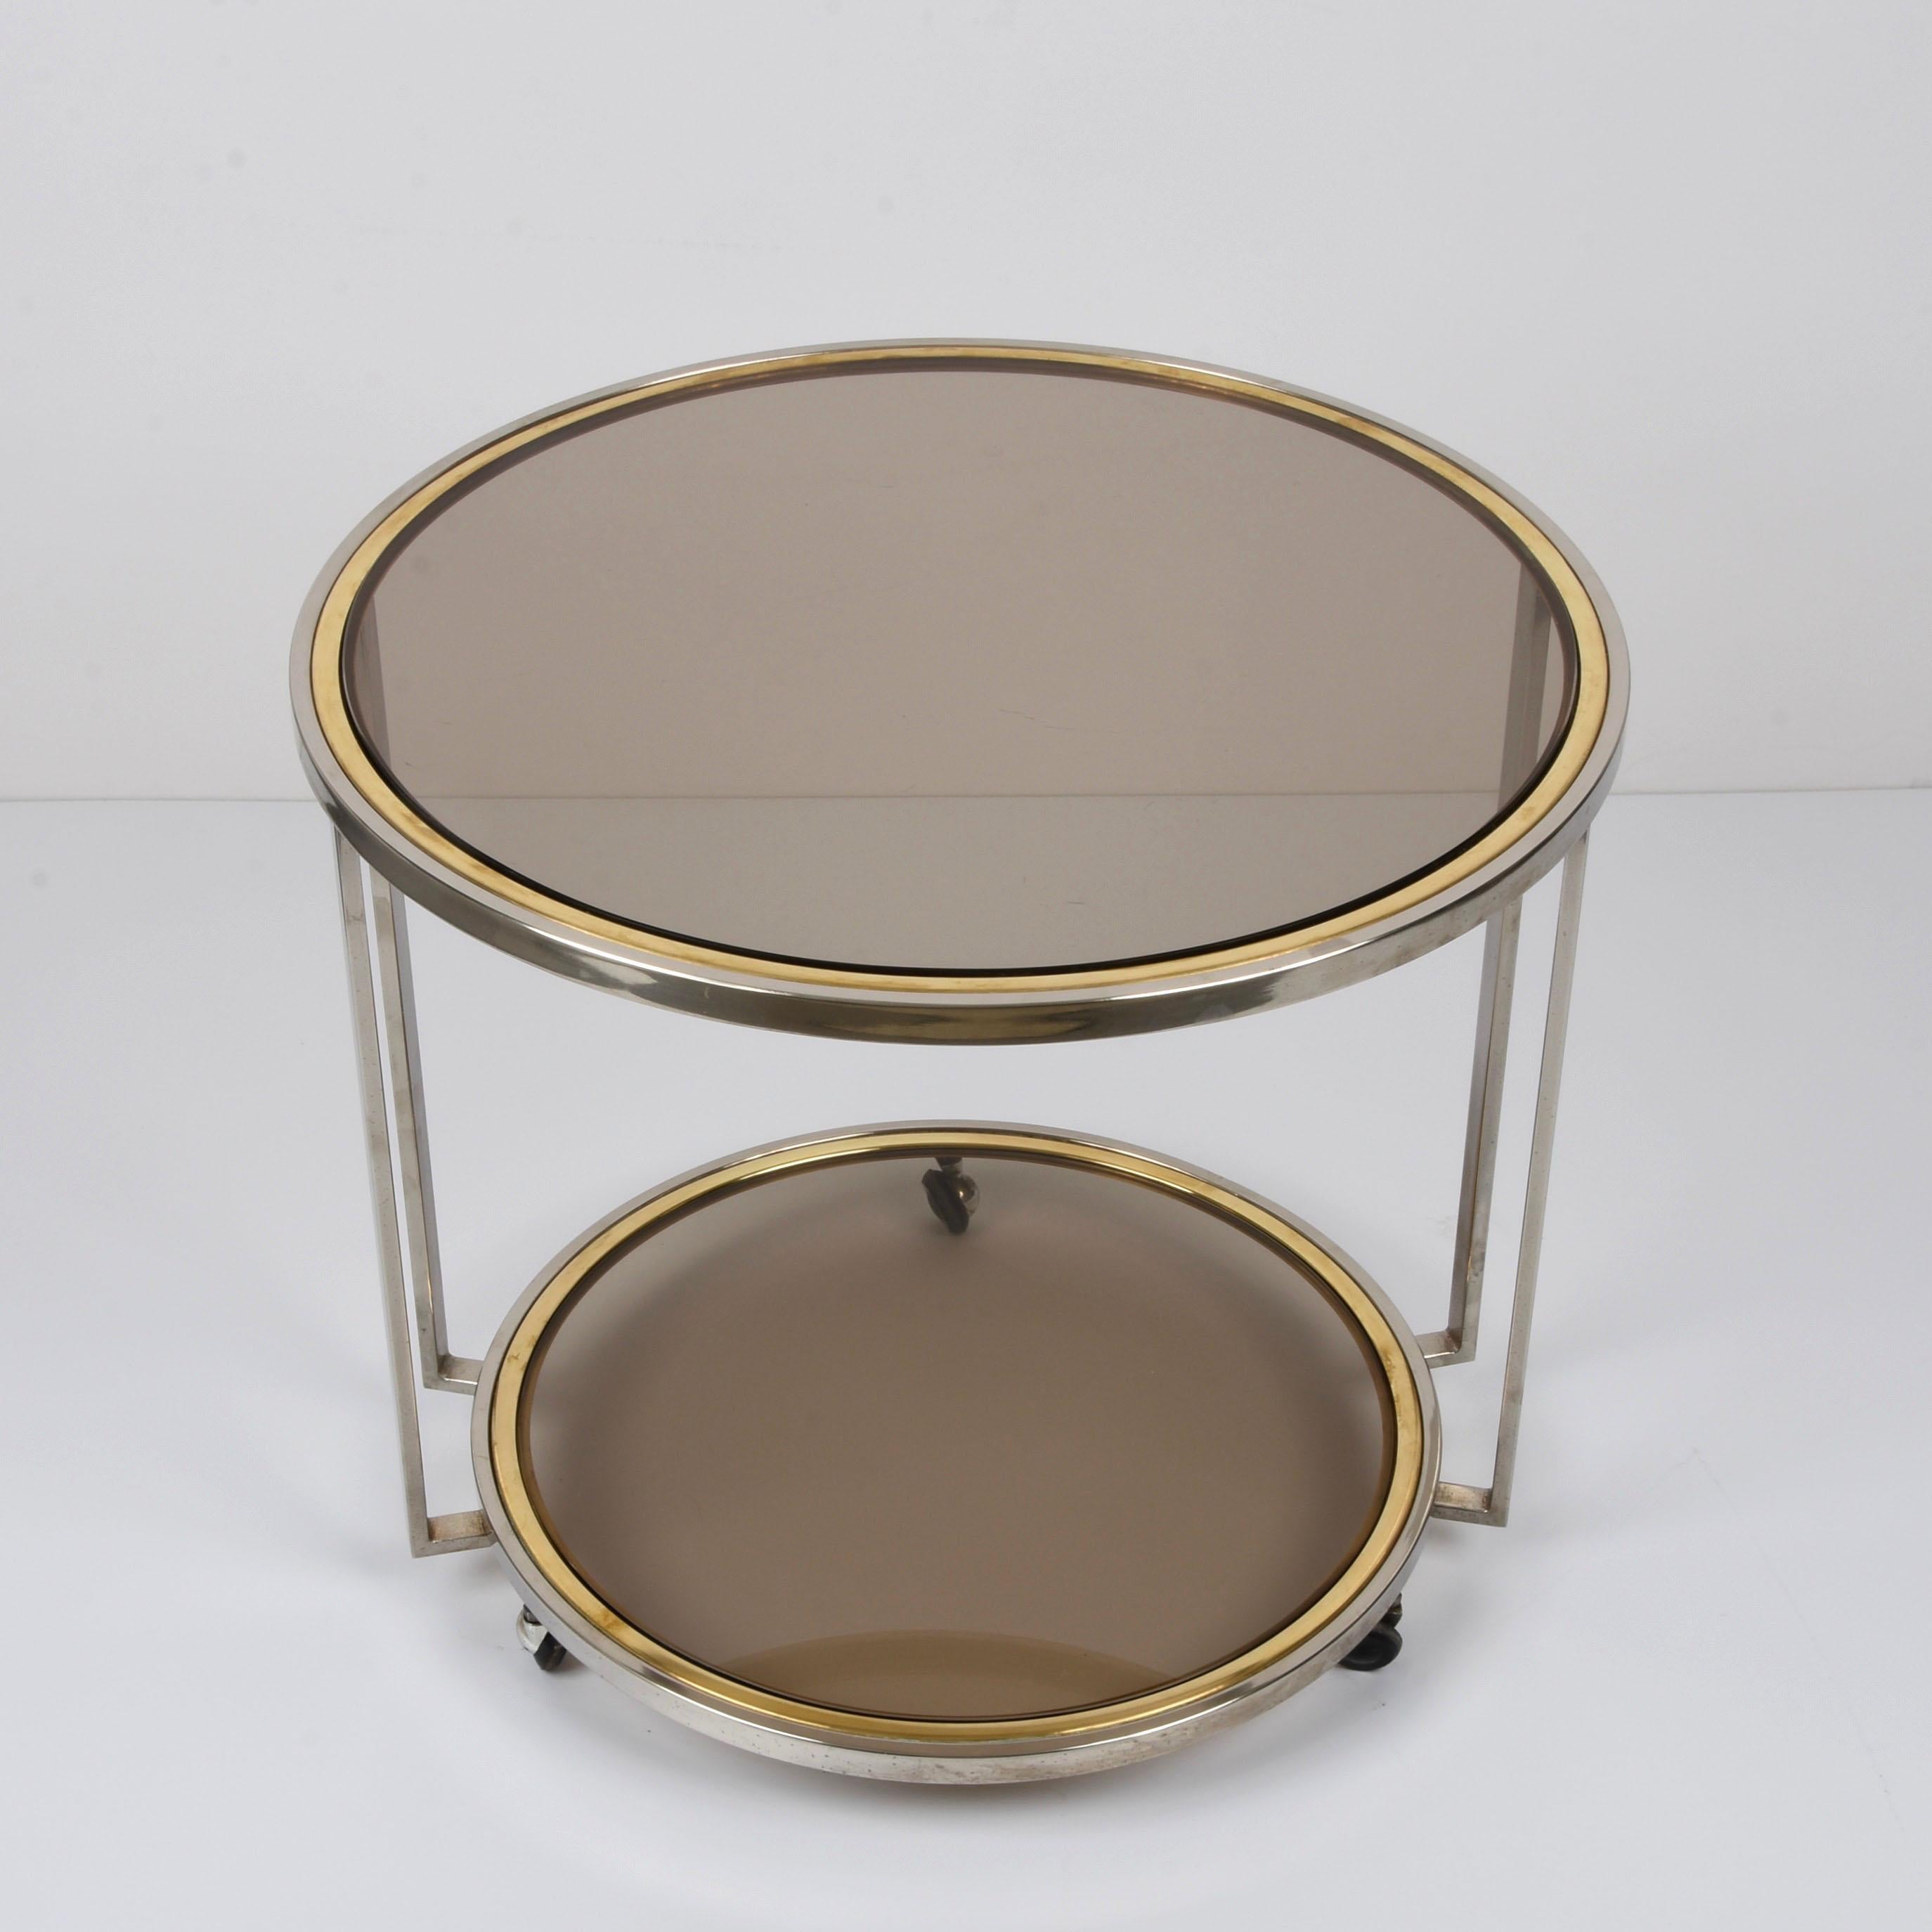 Midcentury Brass and Chrome and Glass Italian Coffee Table after Romeo Rega 1970 For Sale 10